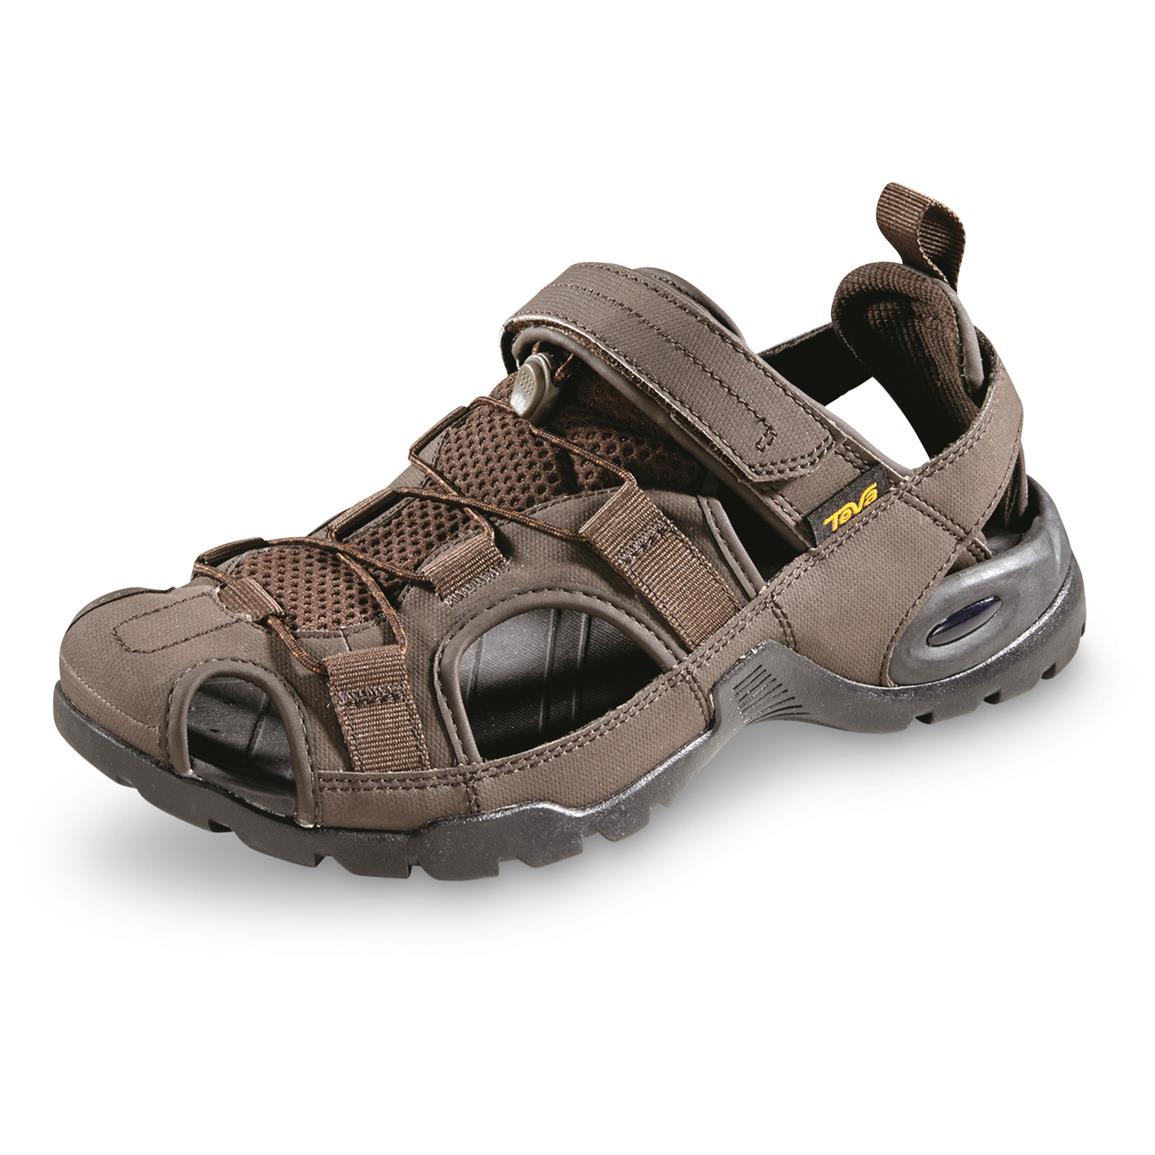 teva sandals >UP to 60% off|Free shipping for worldwide!| Running ...